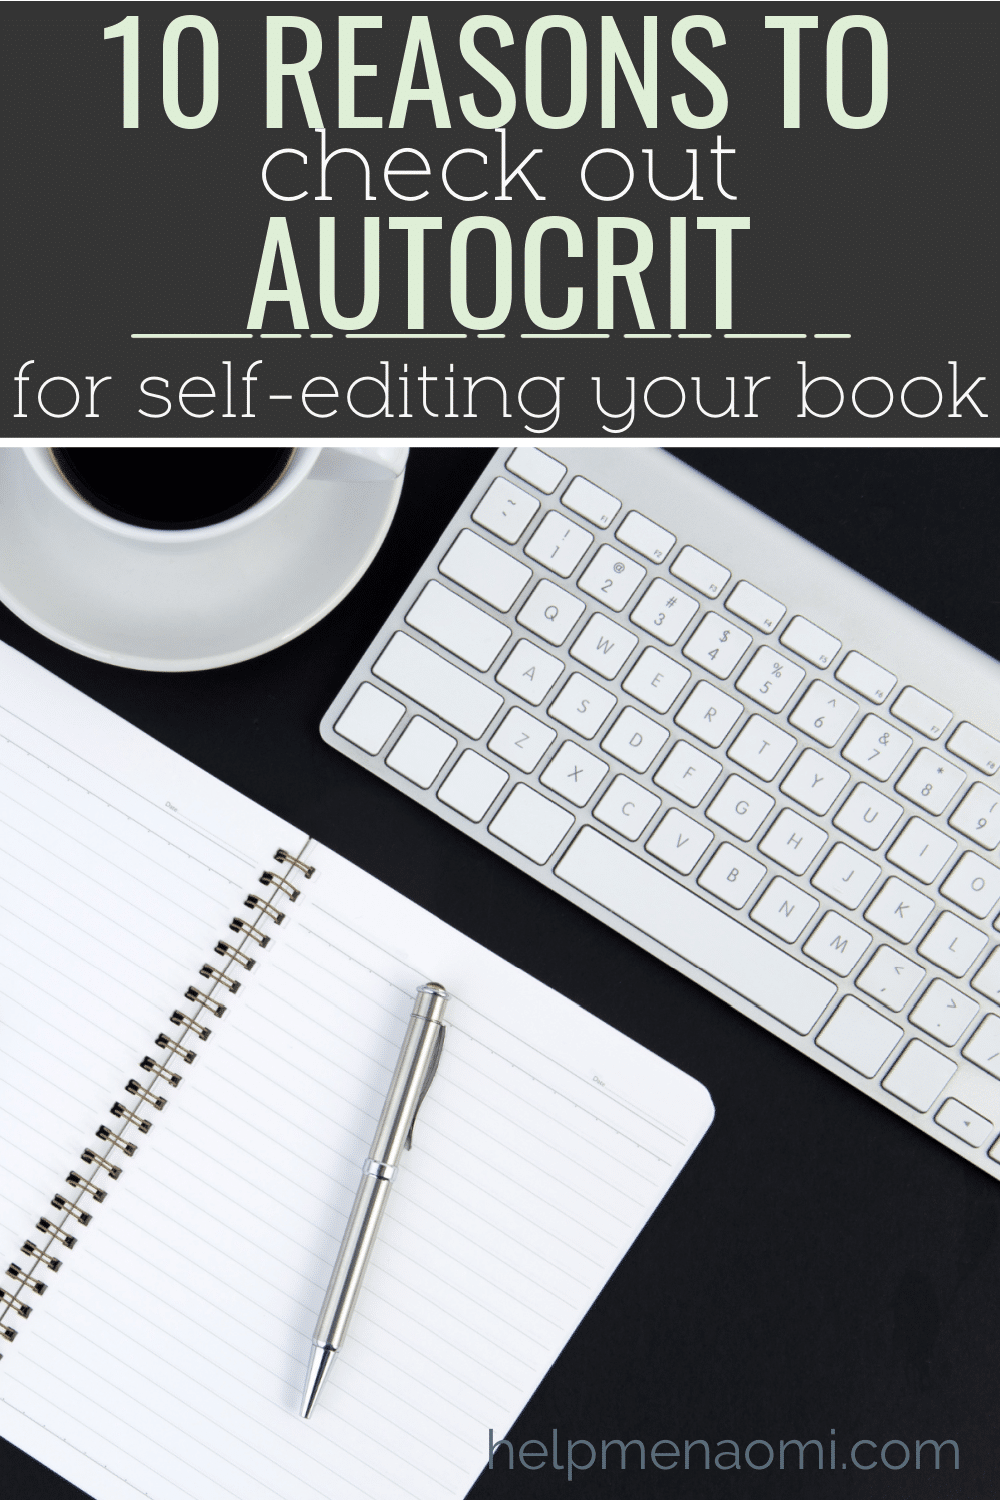 10 Reasons to check out Autocrit for self-editing blog title overlay